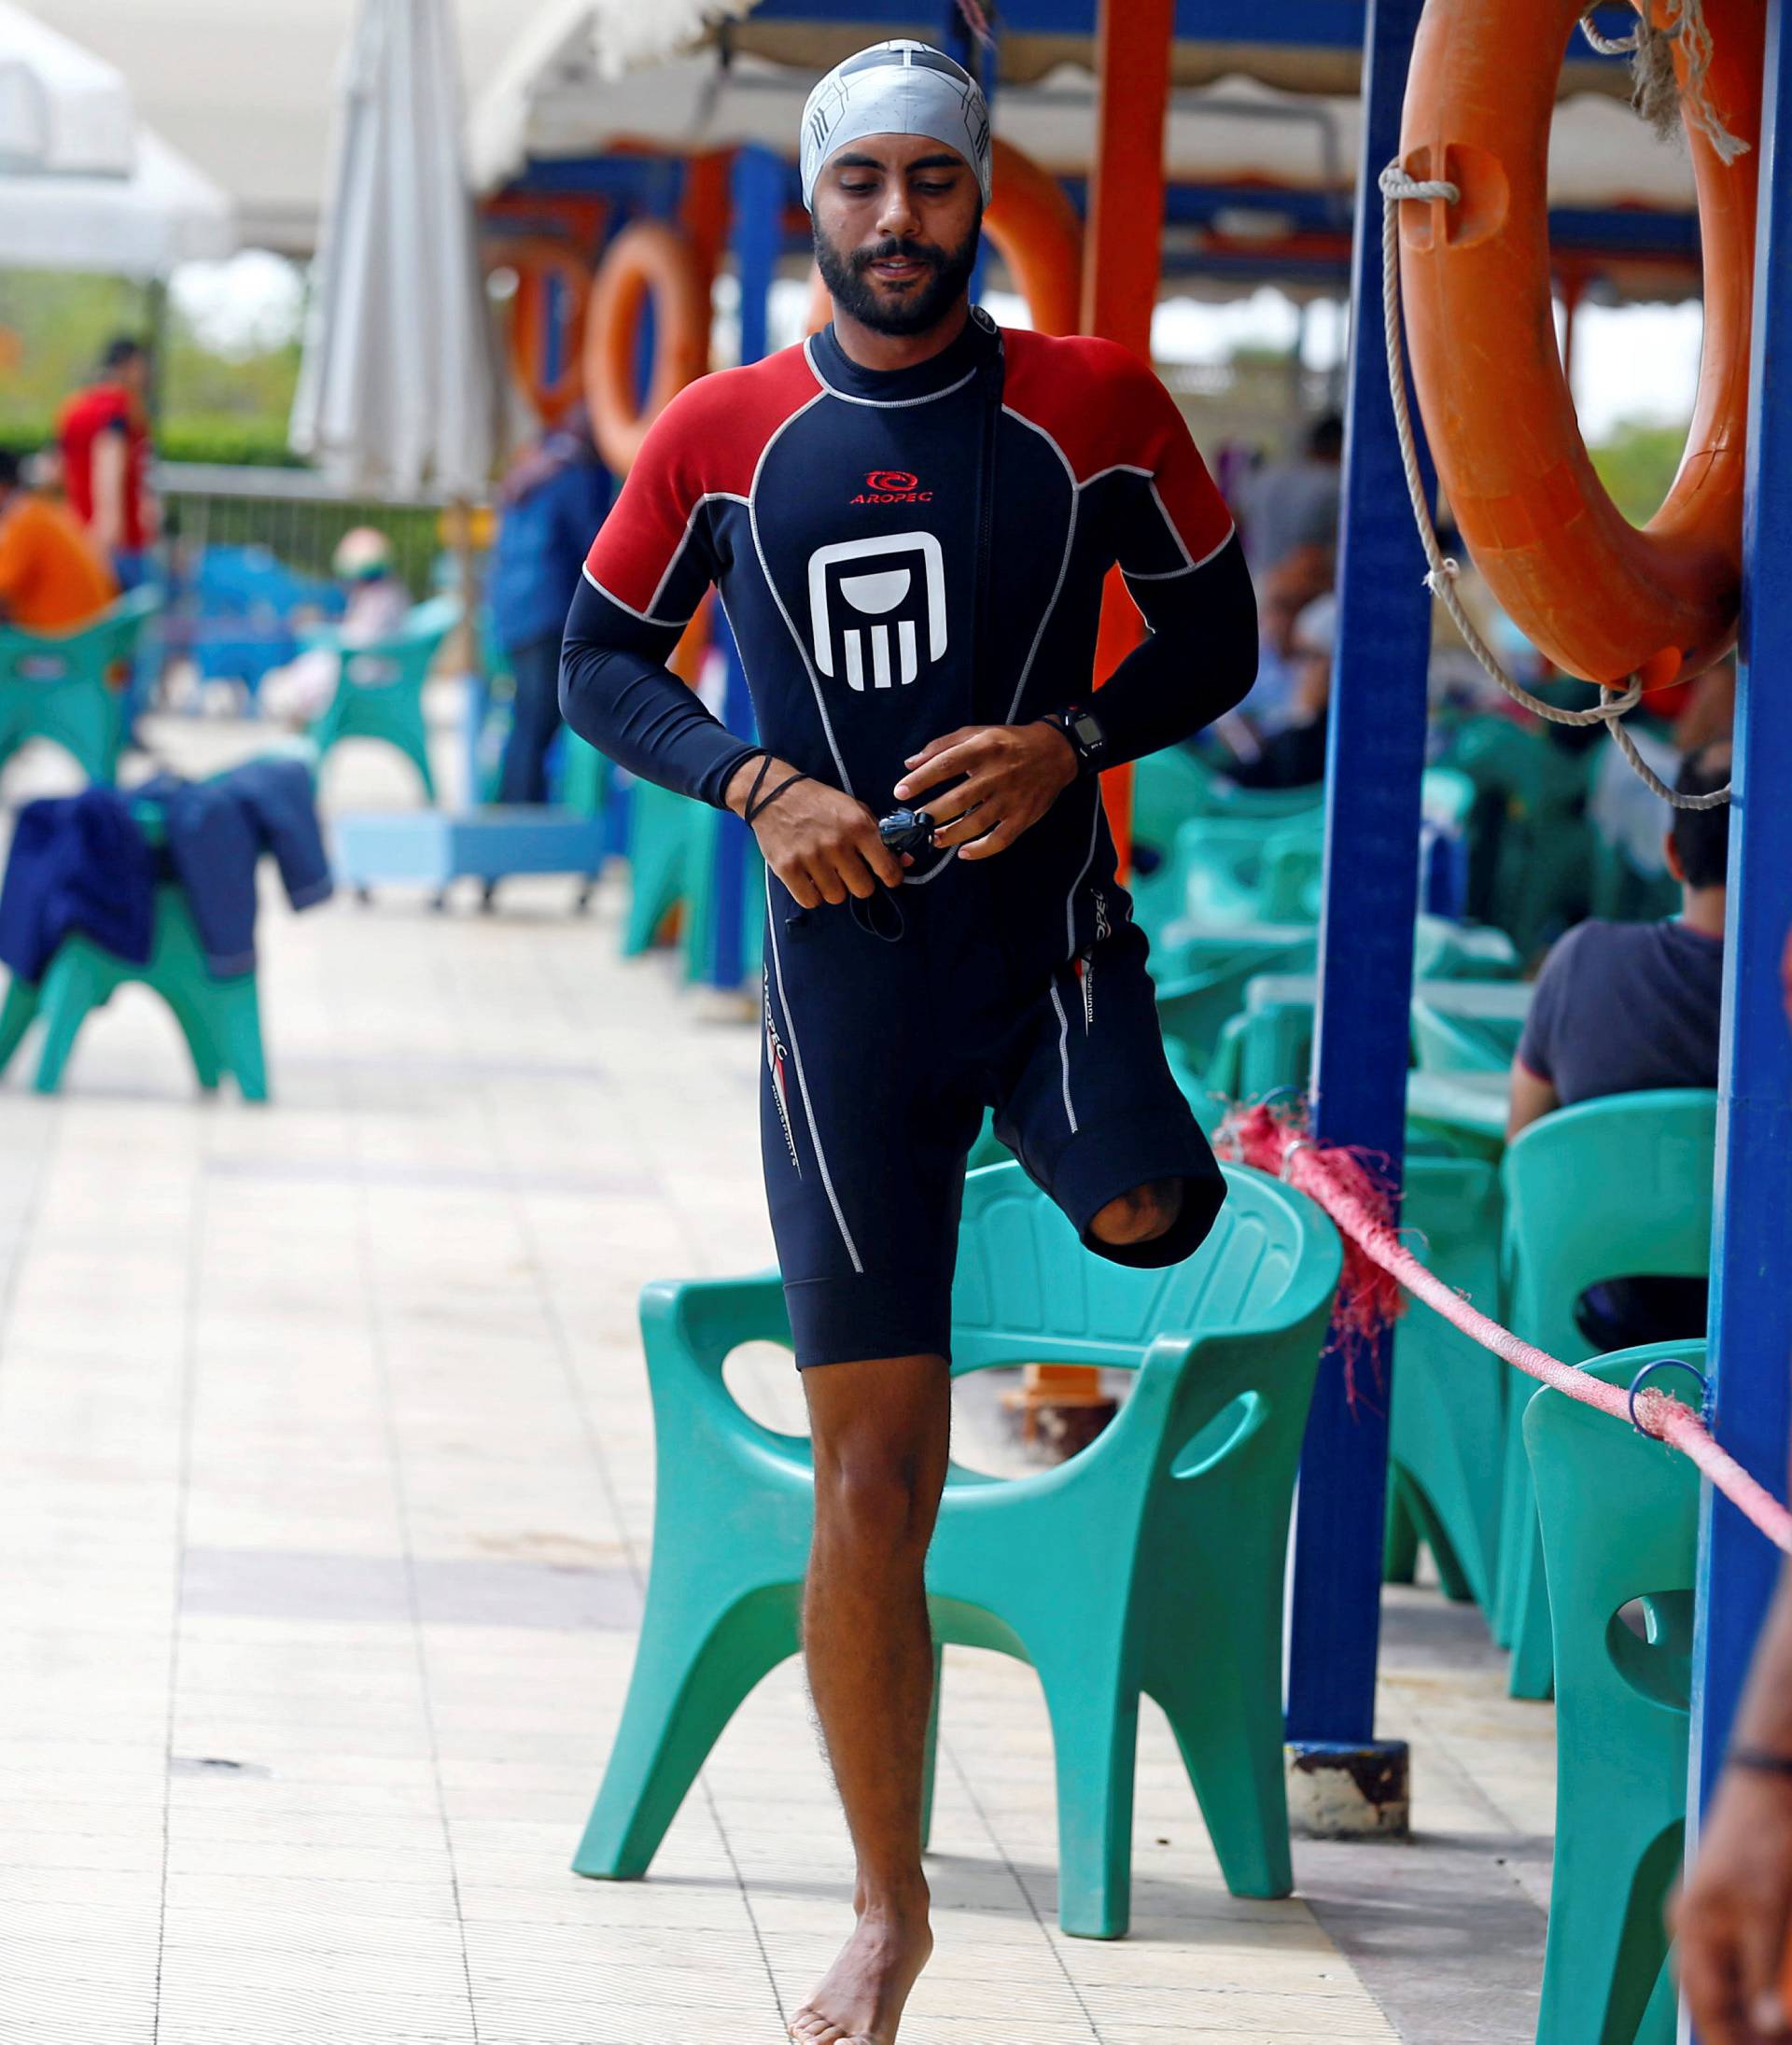 Egyptian swimmer Omar Hegazy, who is the first one-legged man to swim across the Gulf of Aqaba from Egypt to Jordan, before jumping into a swimming pool for practice in Cairo